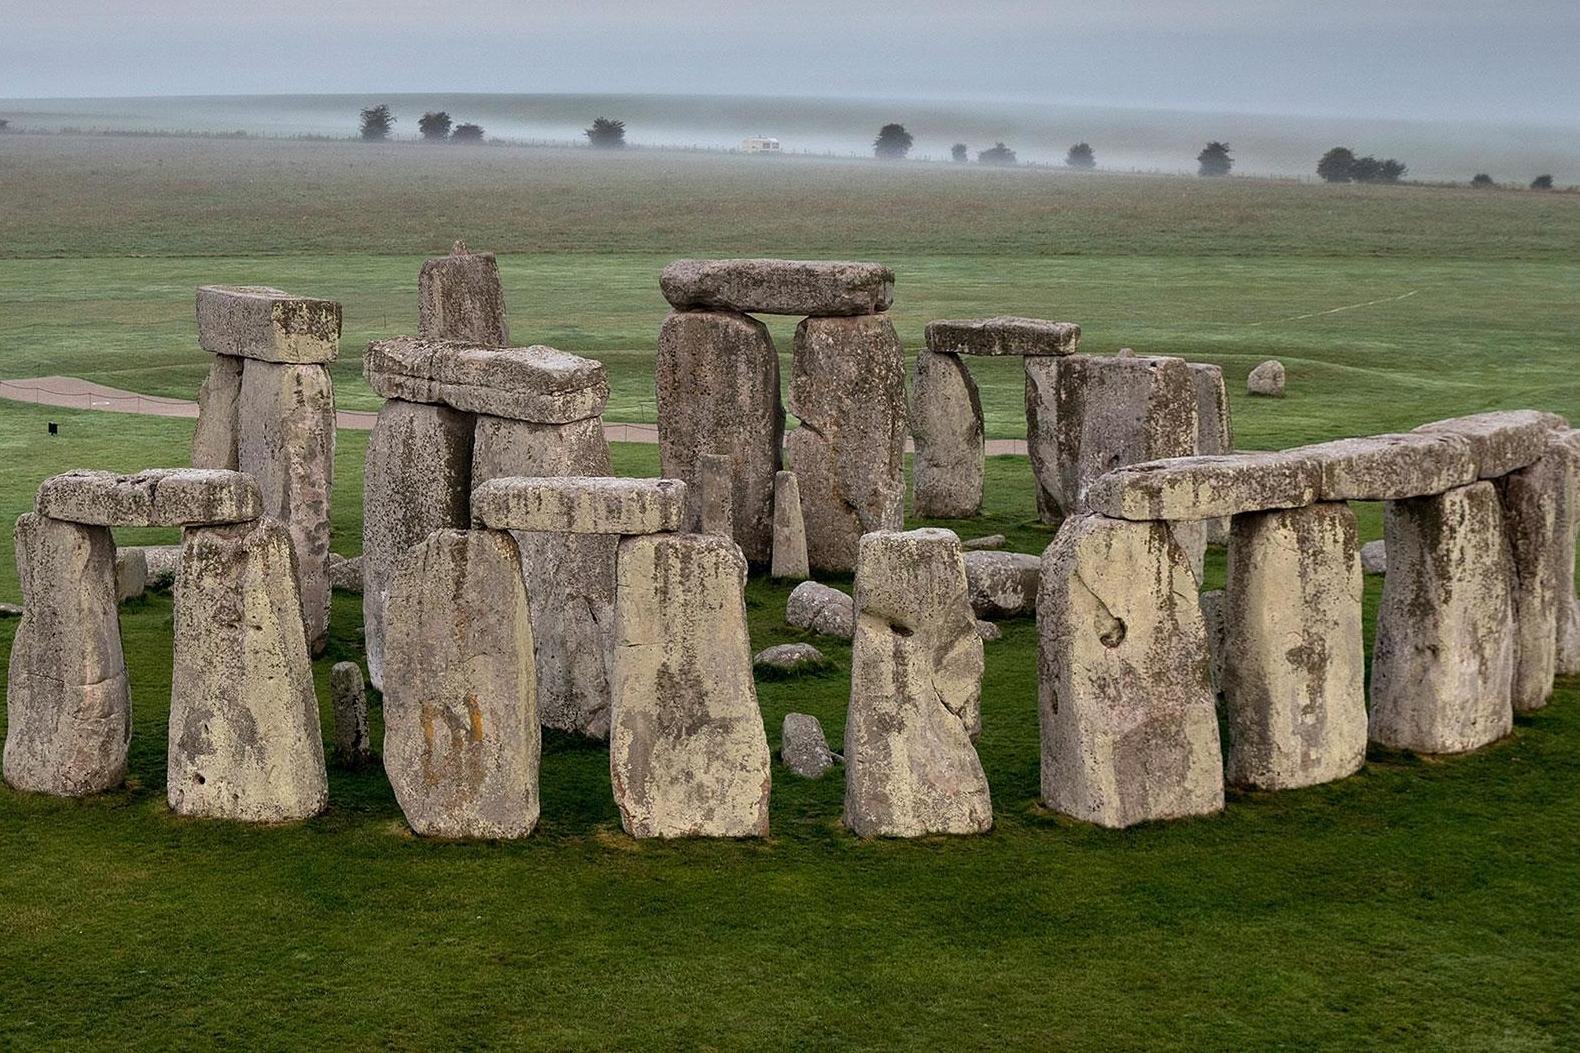 The builders of Stonehenge are thought to be the last of Britain's neolithic people